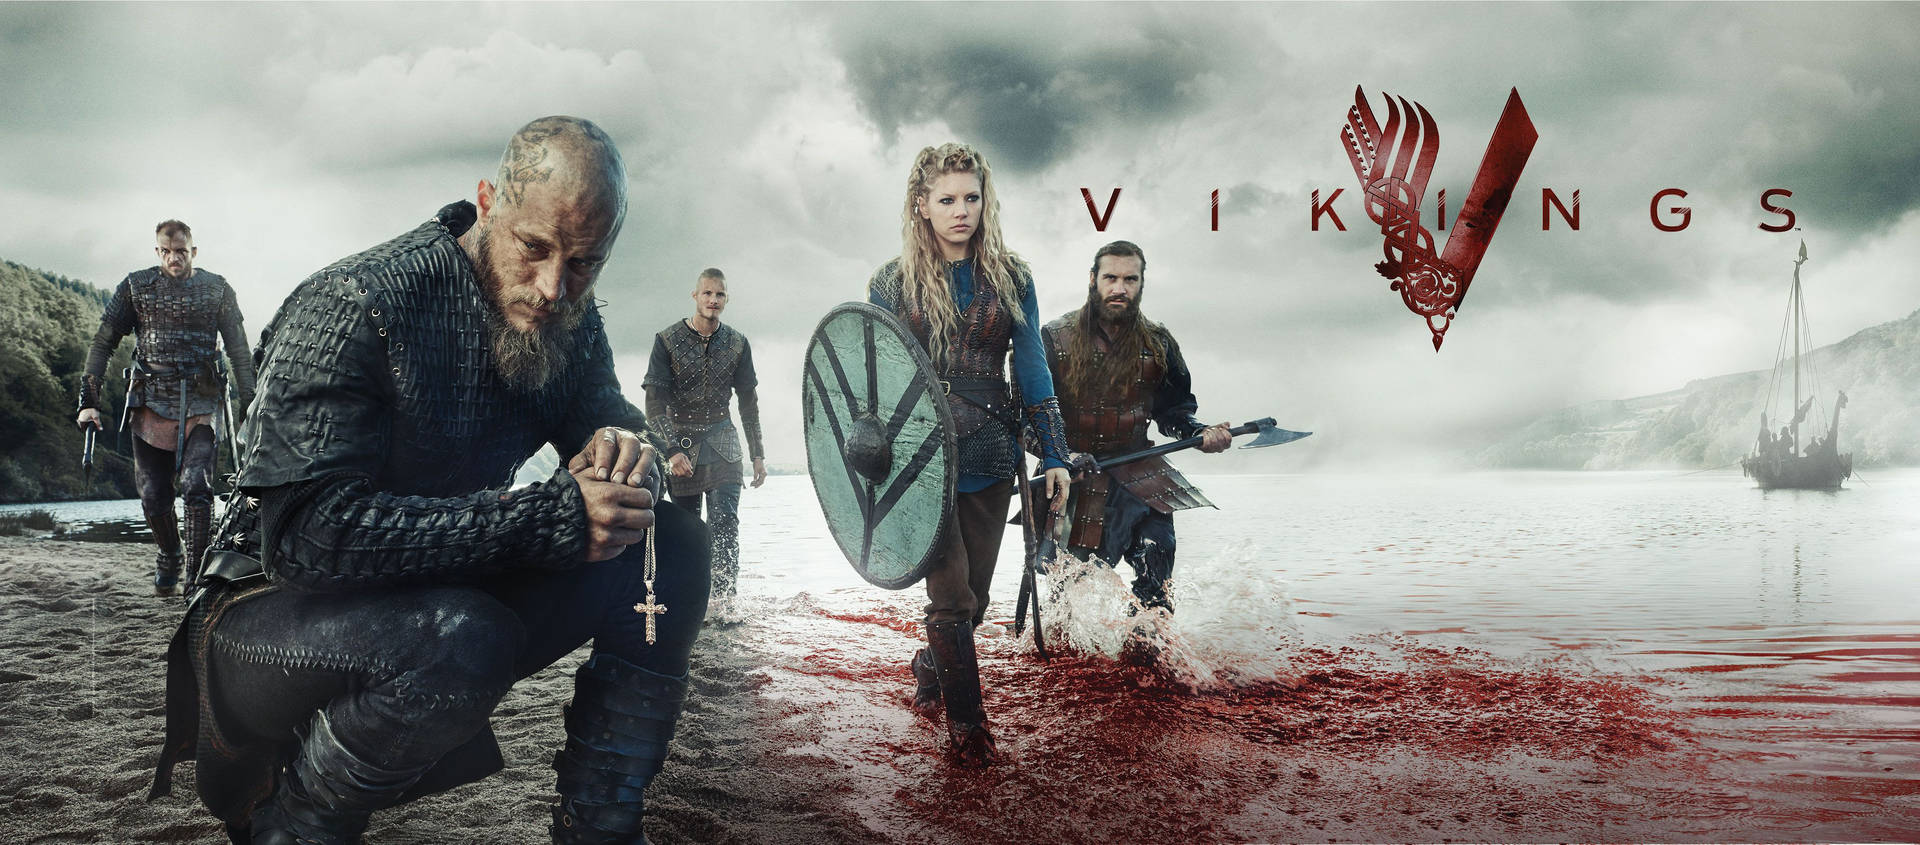 Vikings Characters On Show Poster Wallpaper